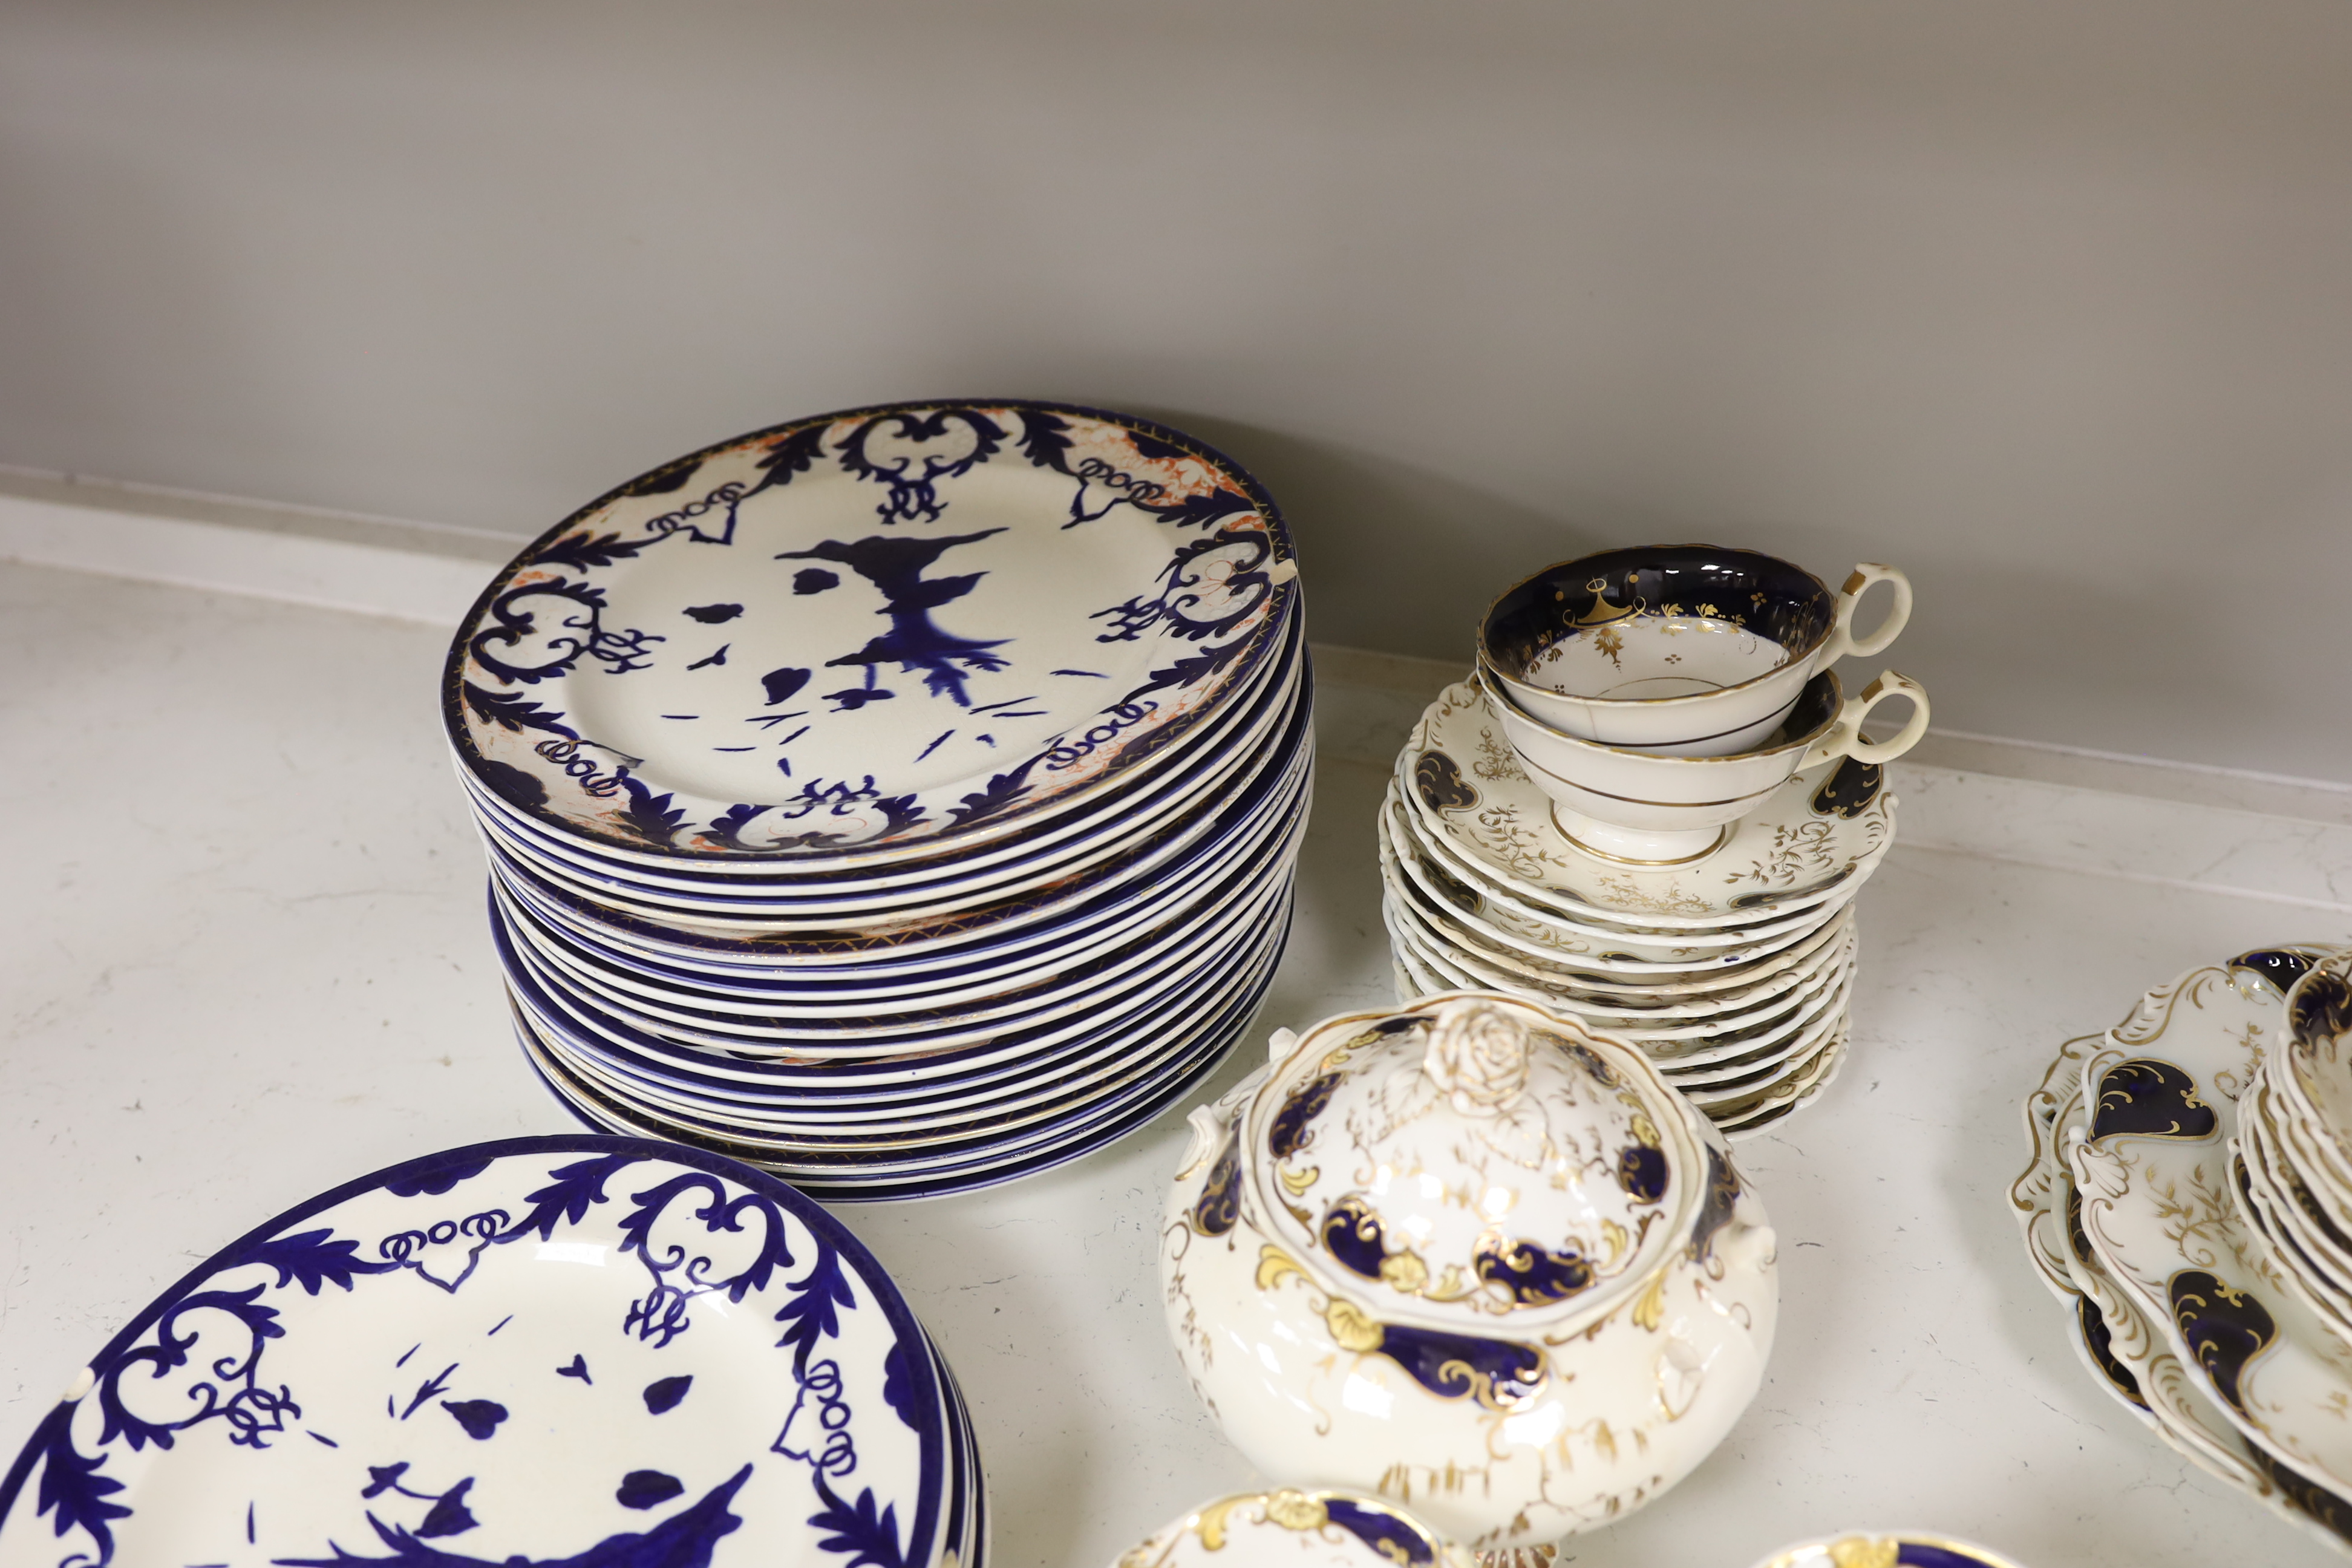 A Royal Crown Derby blue and gilt bordered part dessert service, together with a Victorian Staffordshire blue and gilt part tea service